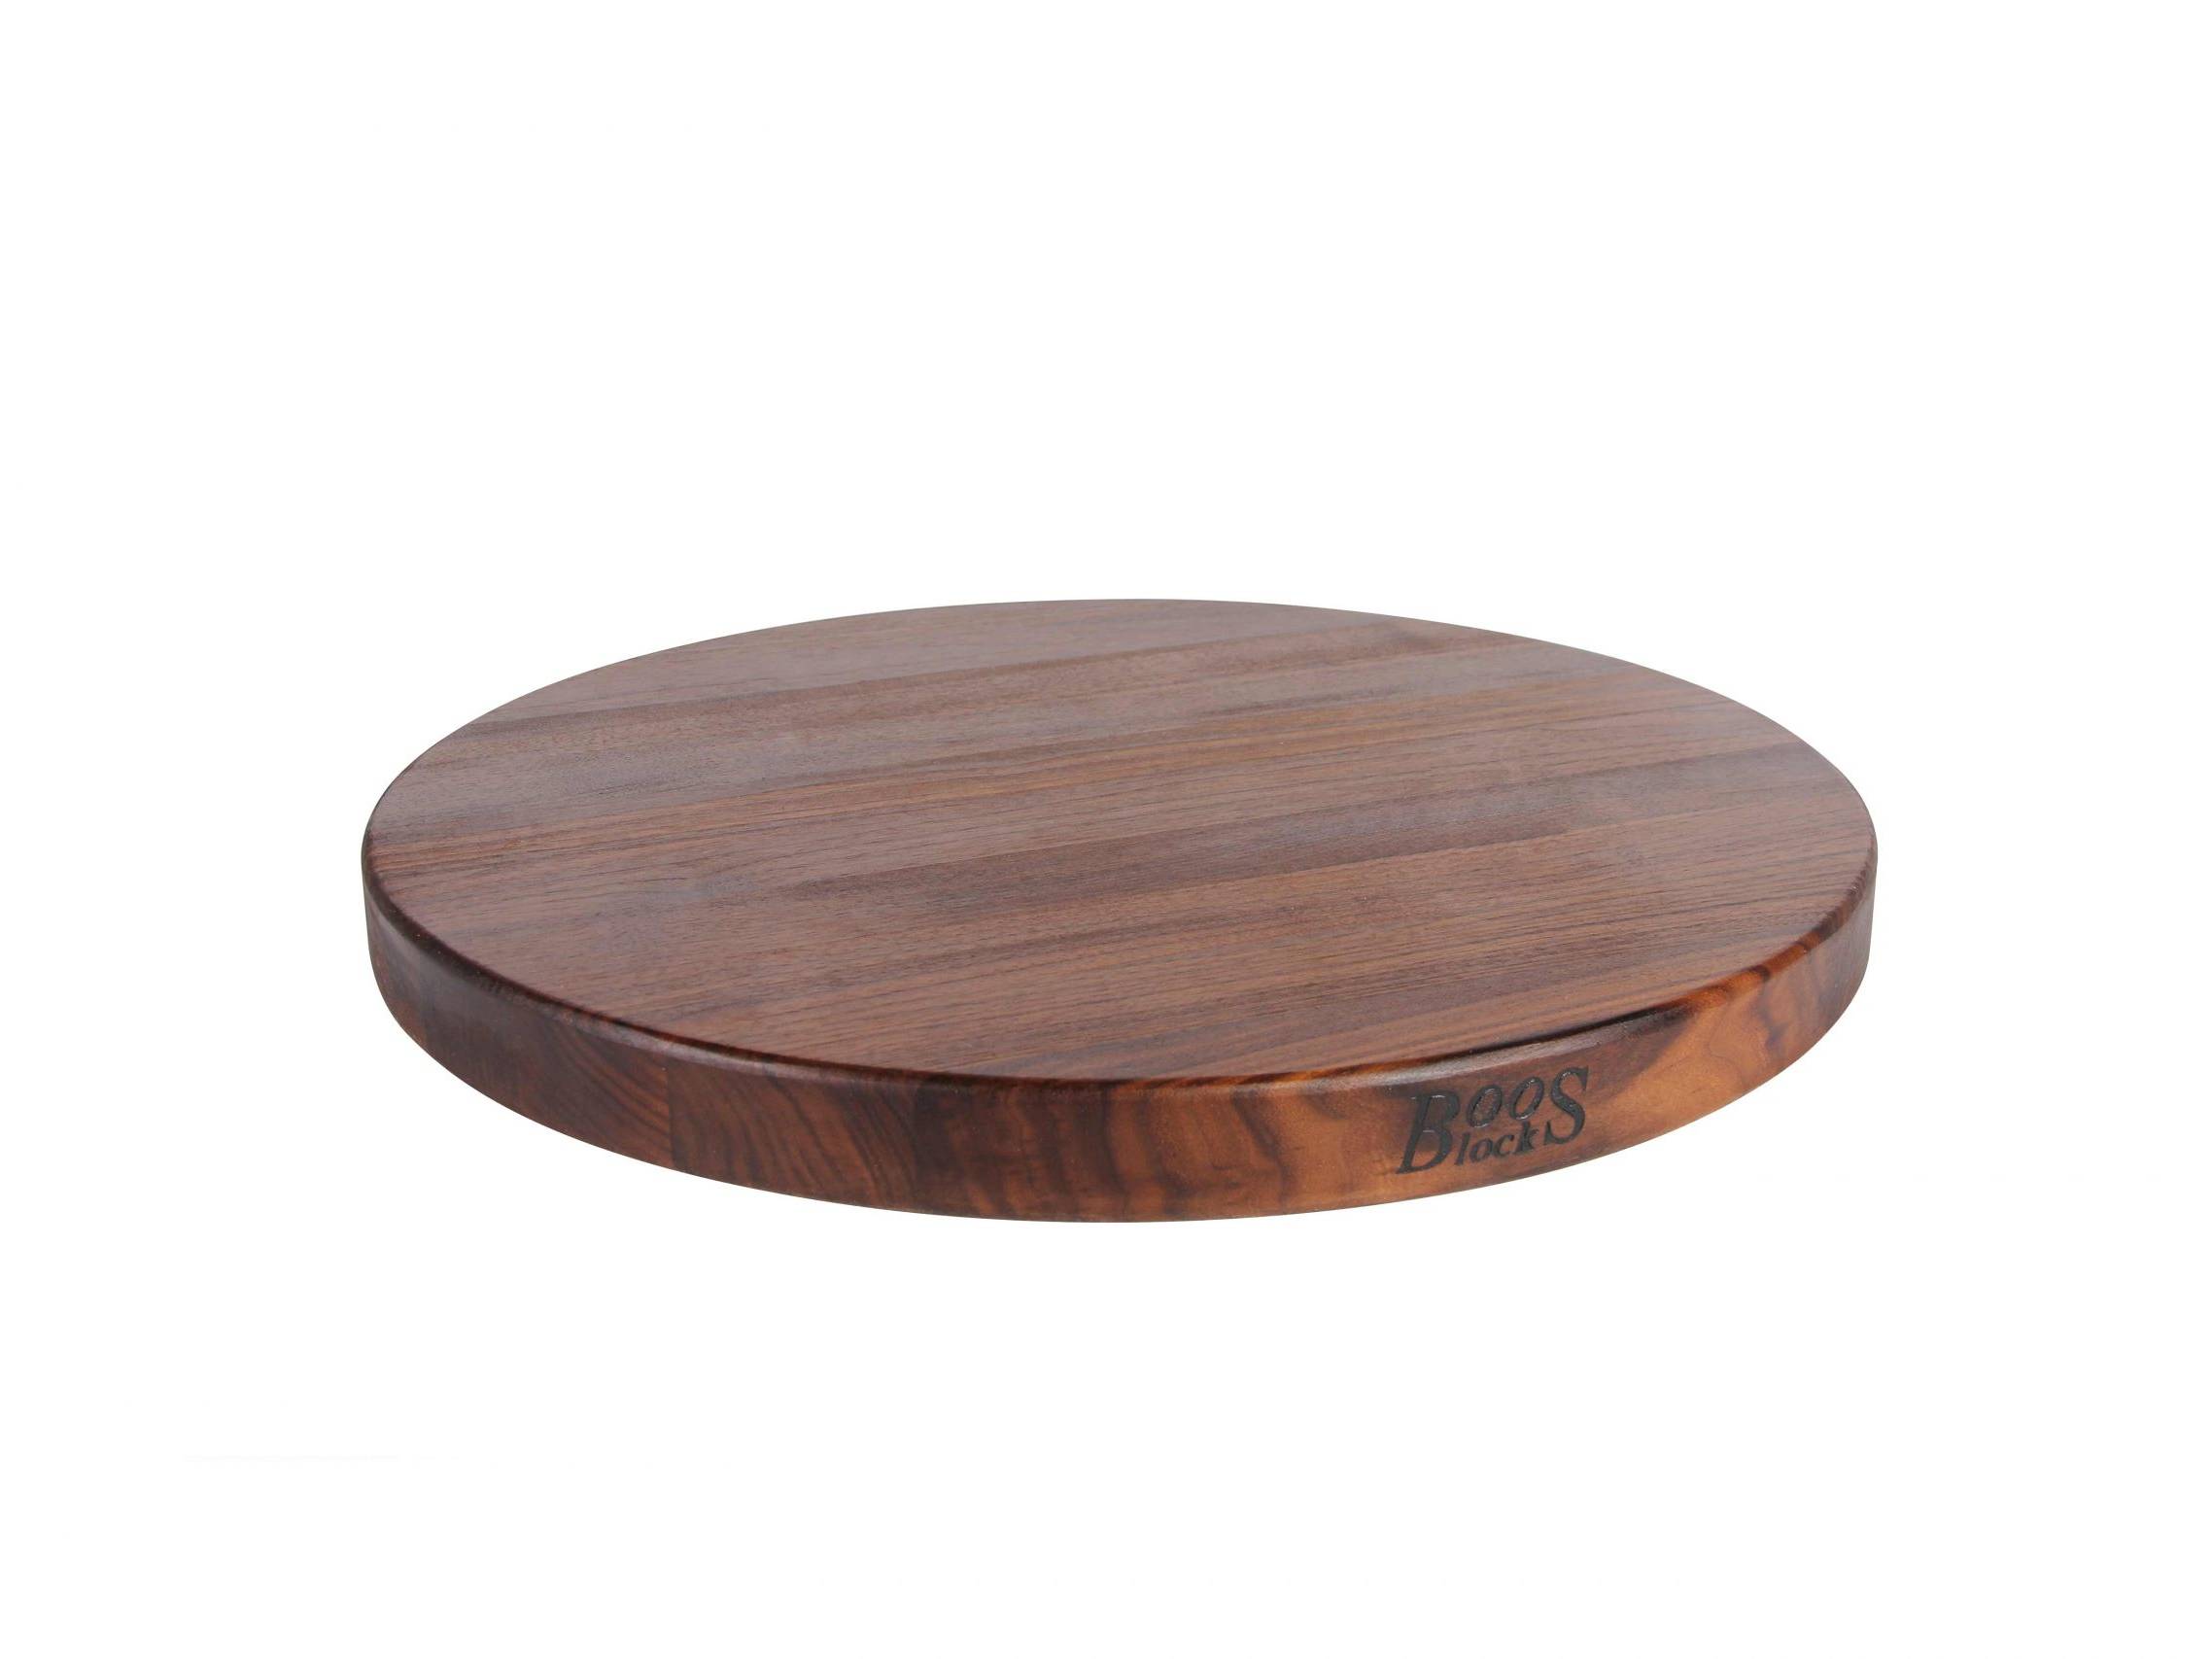 Pro Chef Round Cutting Board With Recessed Handles; Black Walnut; Can Be Used on Both Sides 23